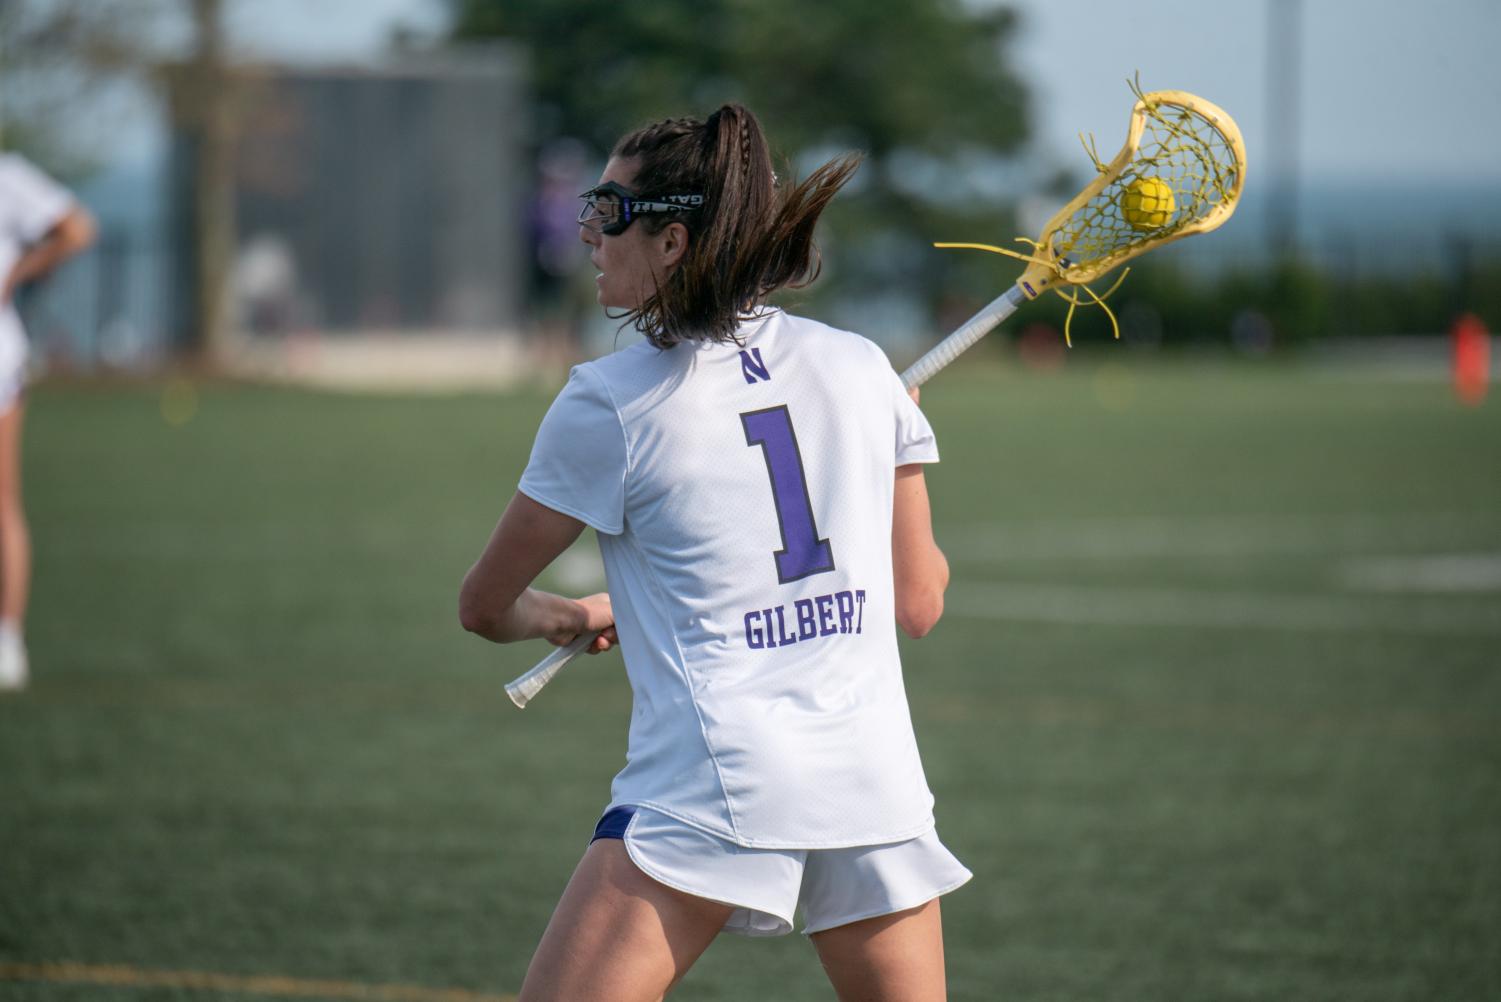 A player in a white jersey holding a lacrosse stick with a ball prepares to make a free position shot.